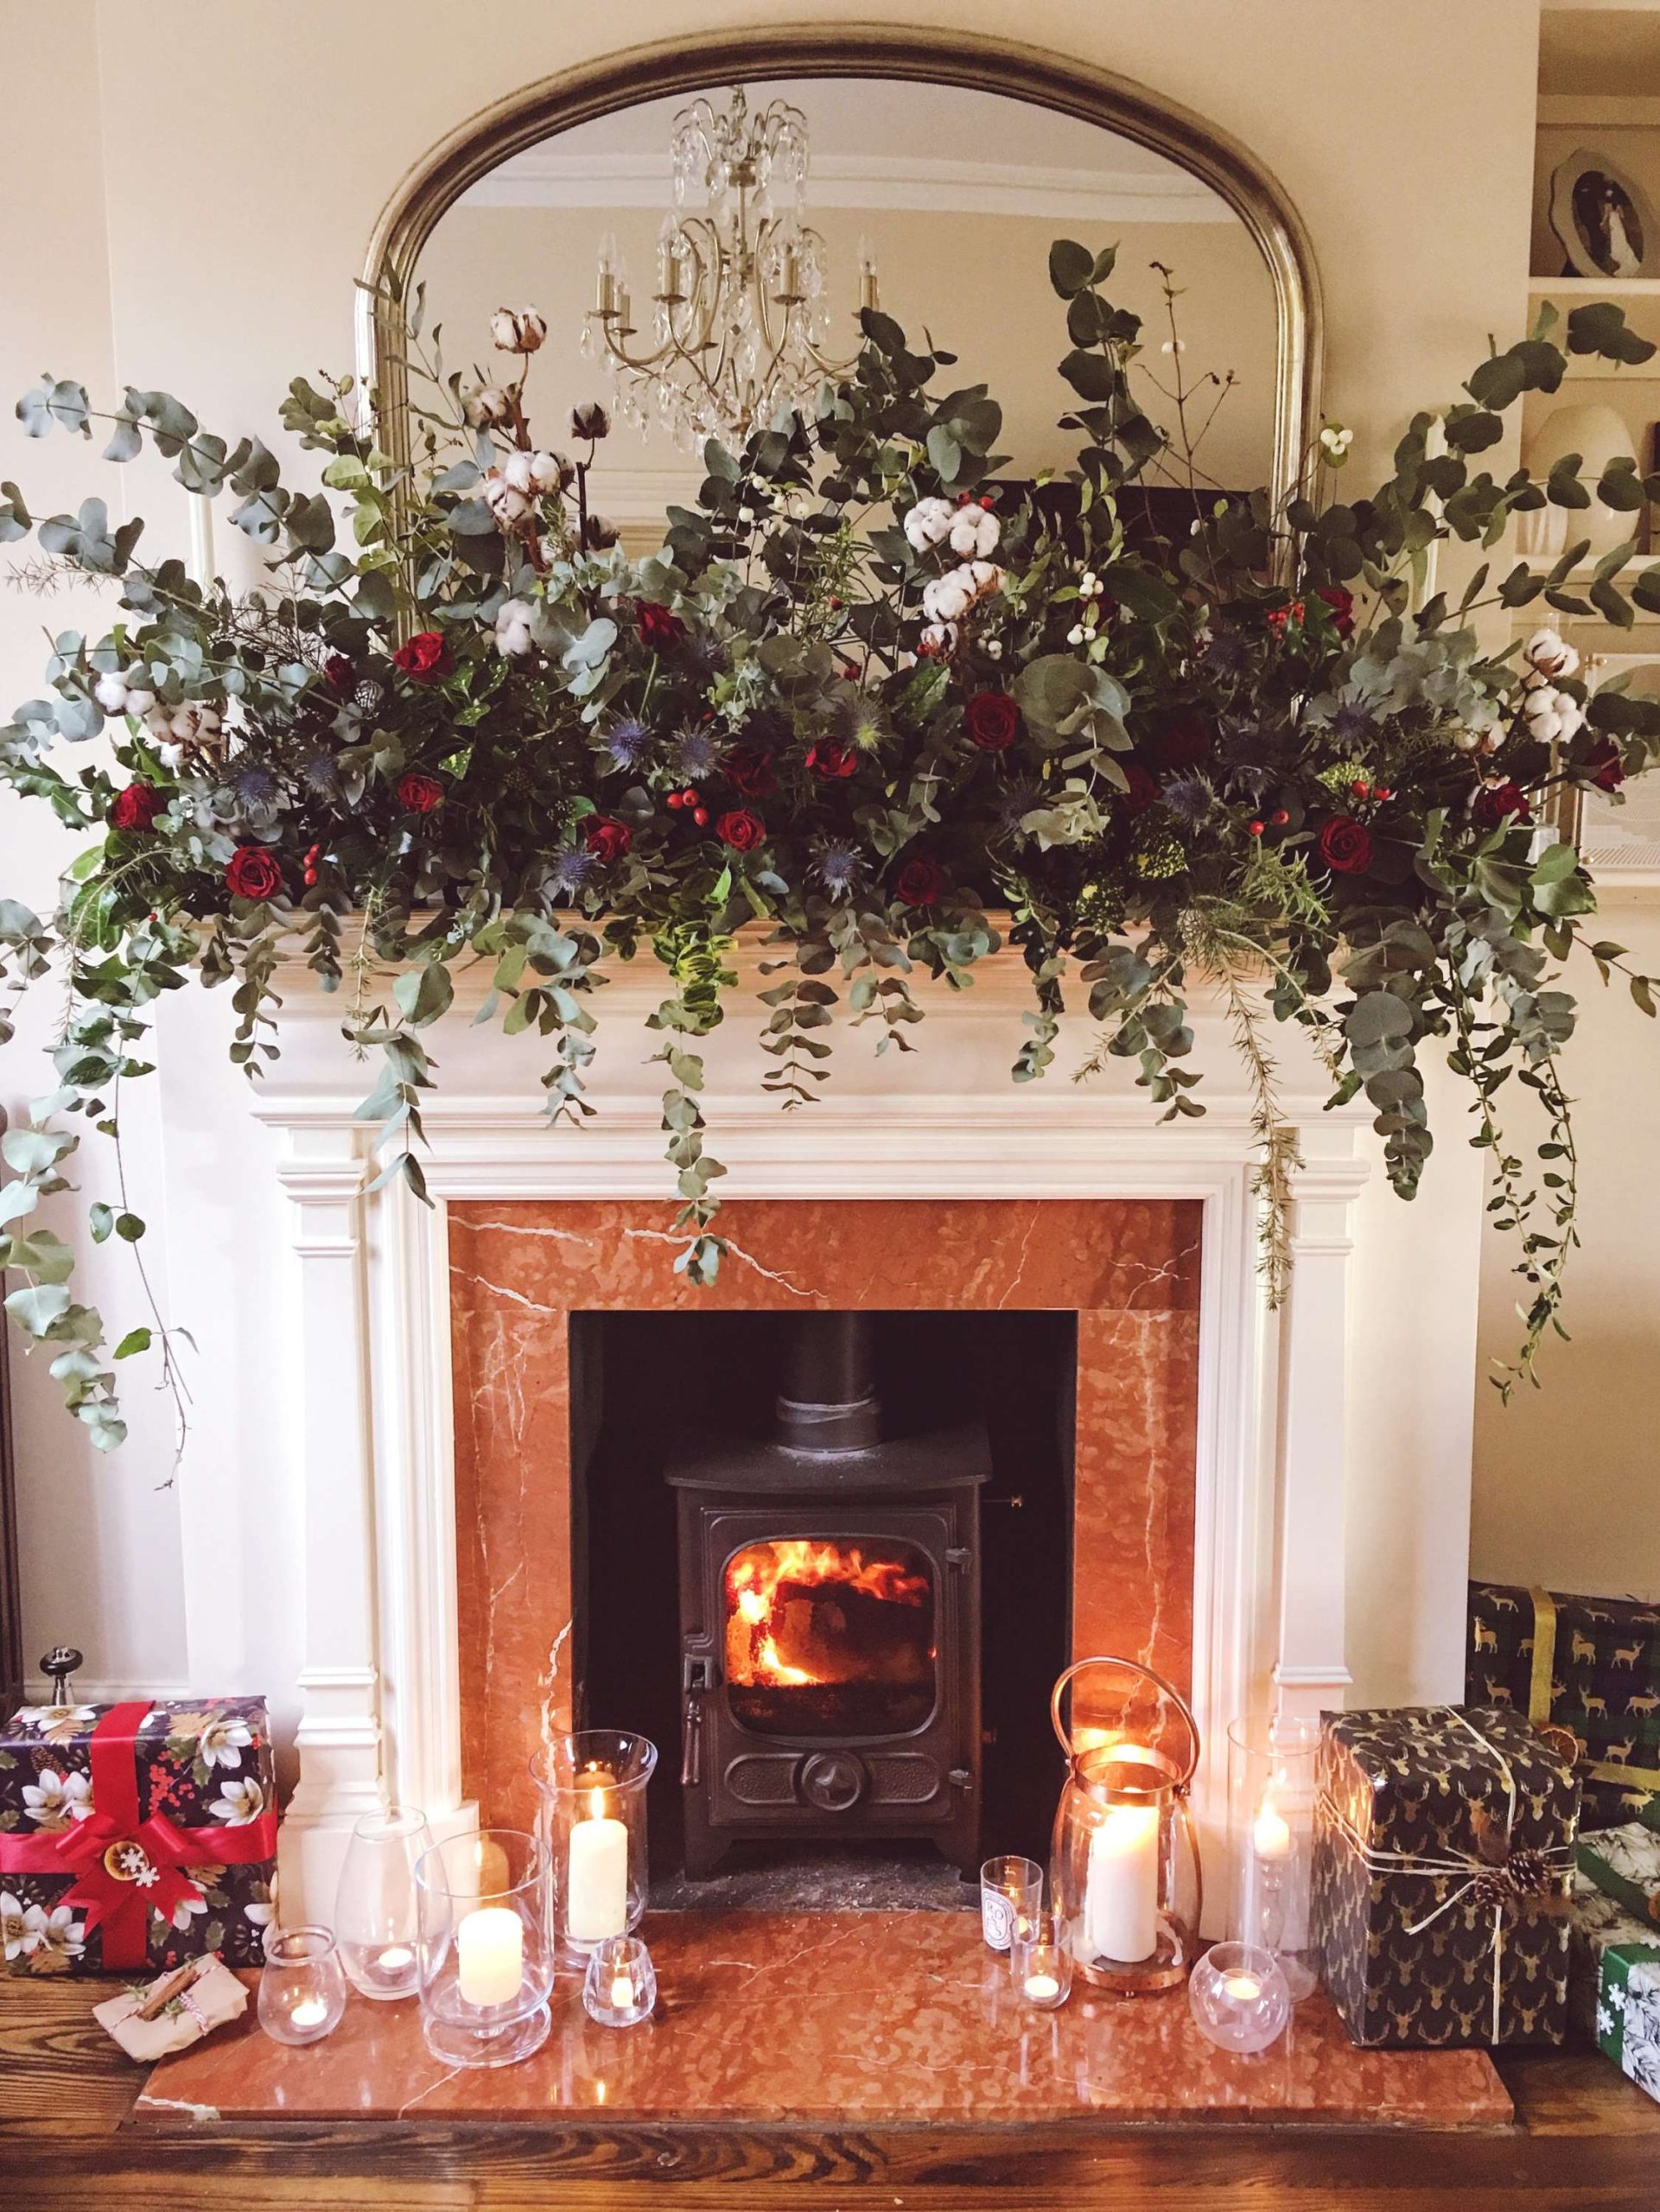 My Home At Christmas (+ How To Make This Fireplace Garland